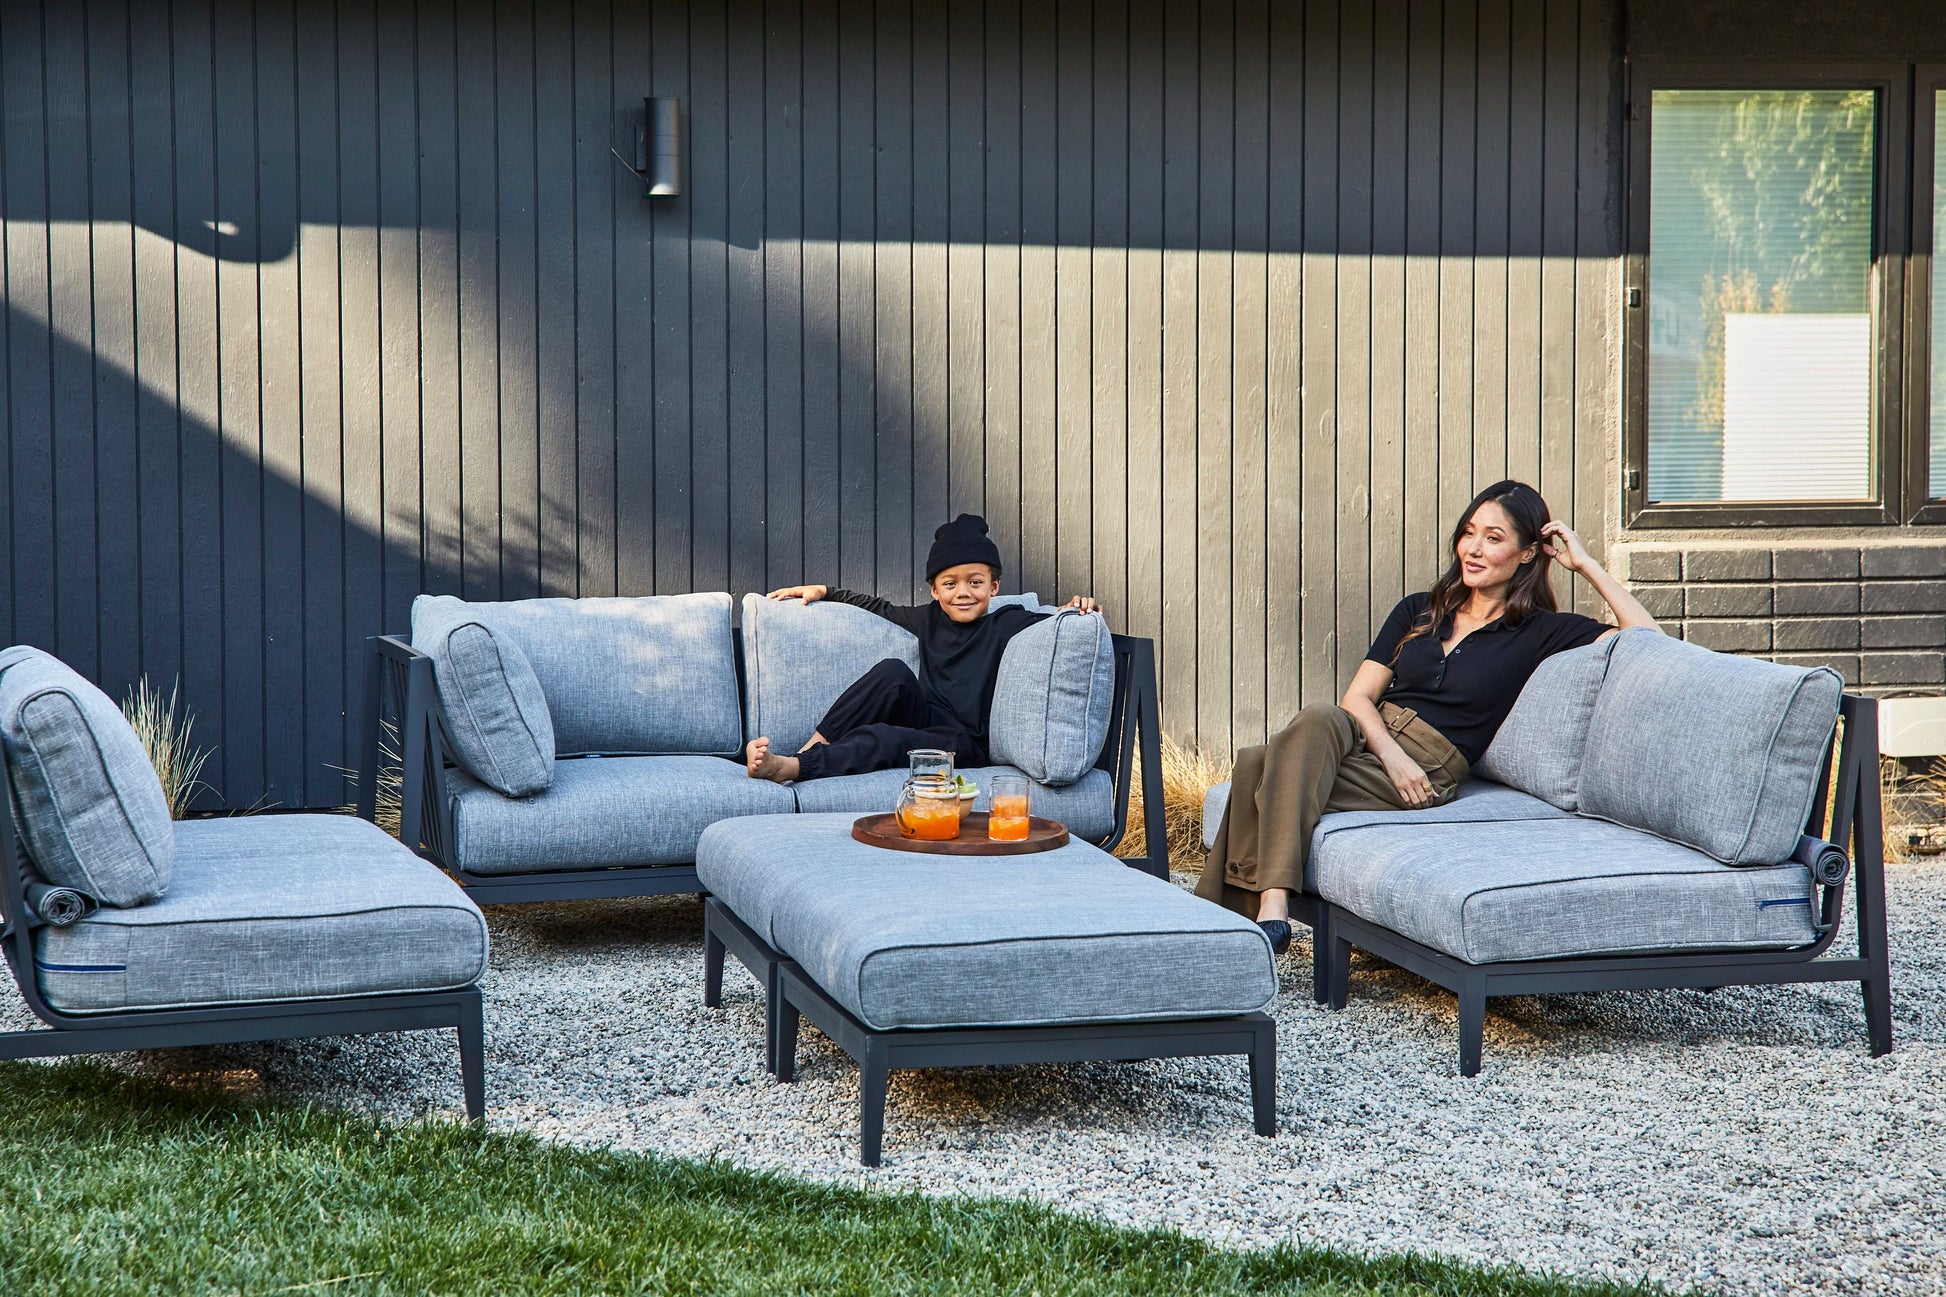 Live Outer 127" x 64" Charcoal Aluminum Outdoor L Shape Sectional 5-Seat With Pacific Fog Gray Cushion